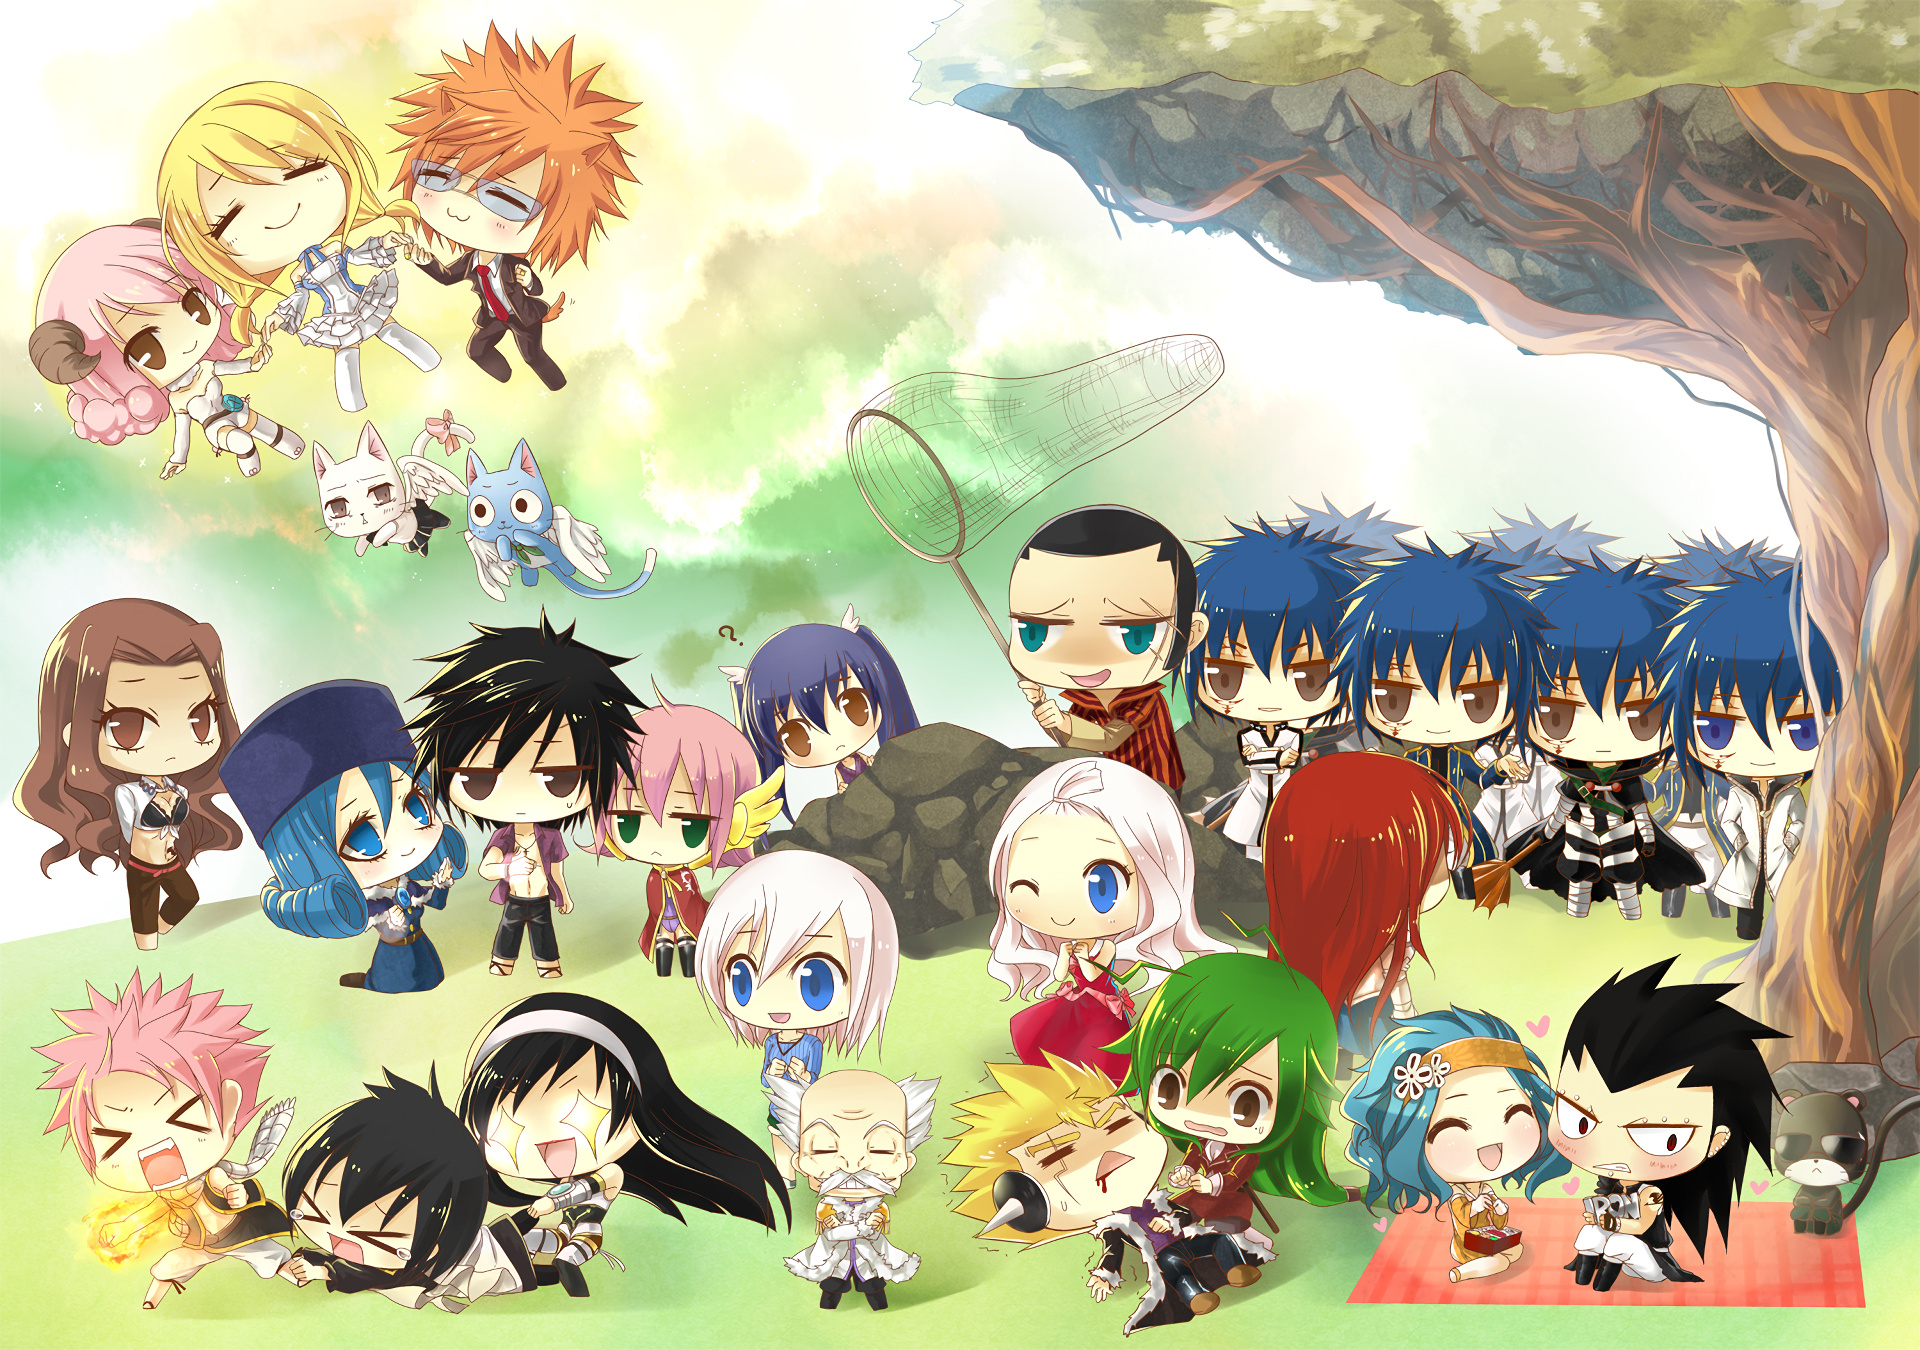 Chibi, Fairy Tail, Mirajane and Jellal, Mythical world wallpapers, 1920x1350 HD Desktop